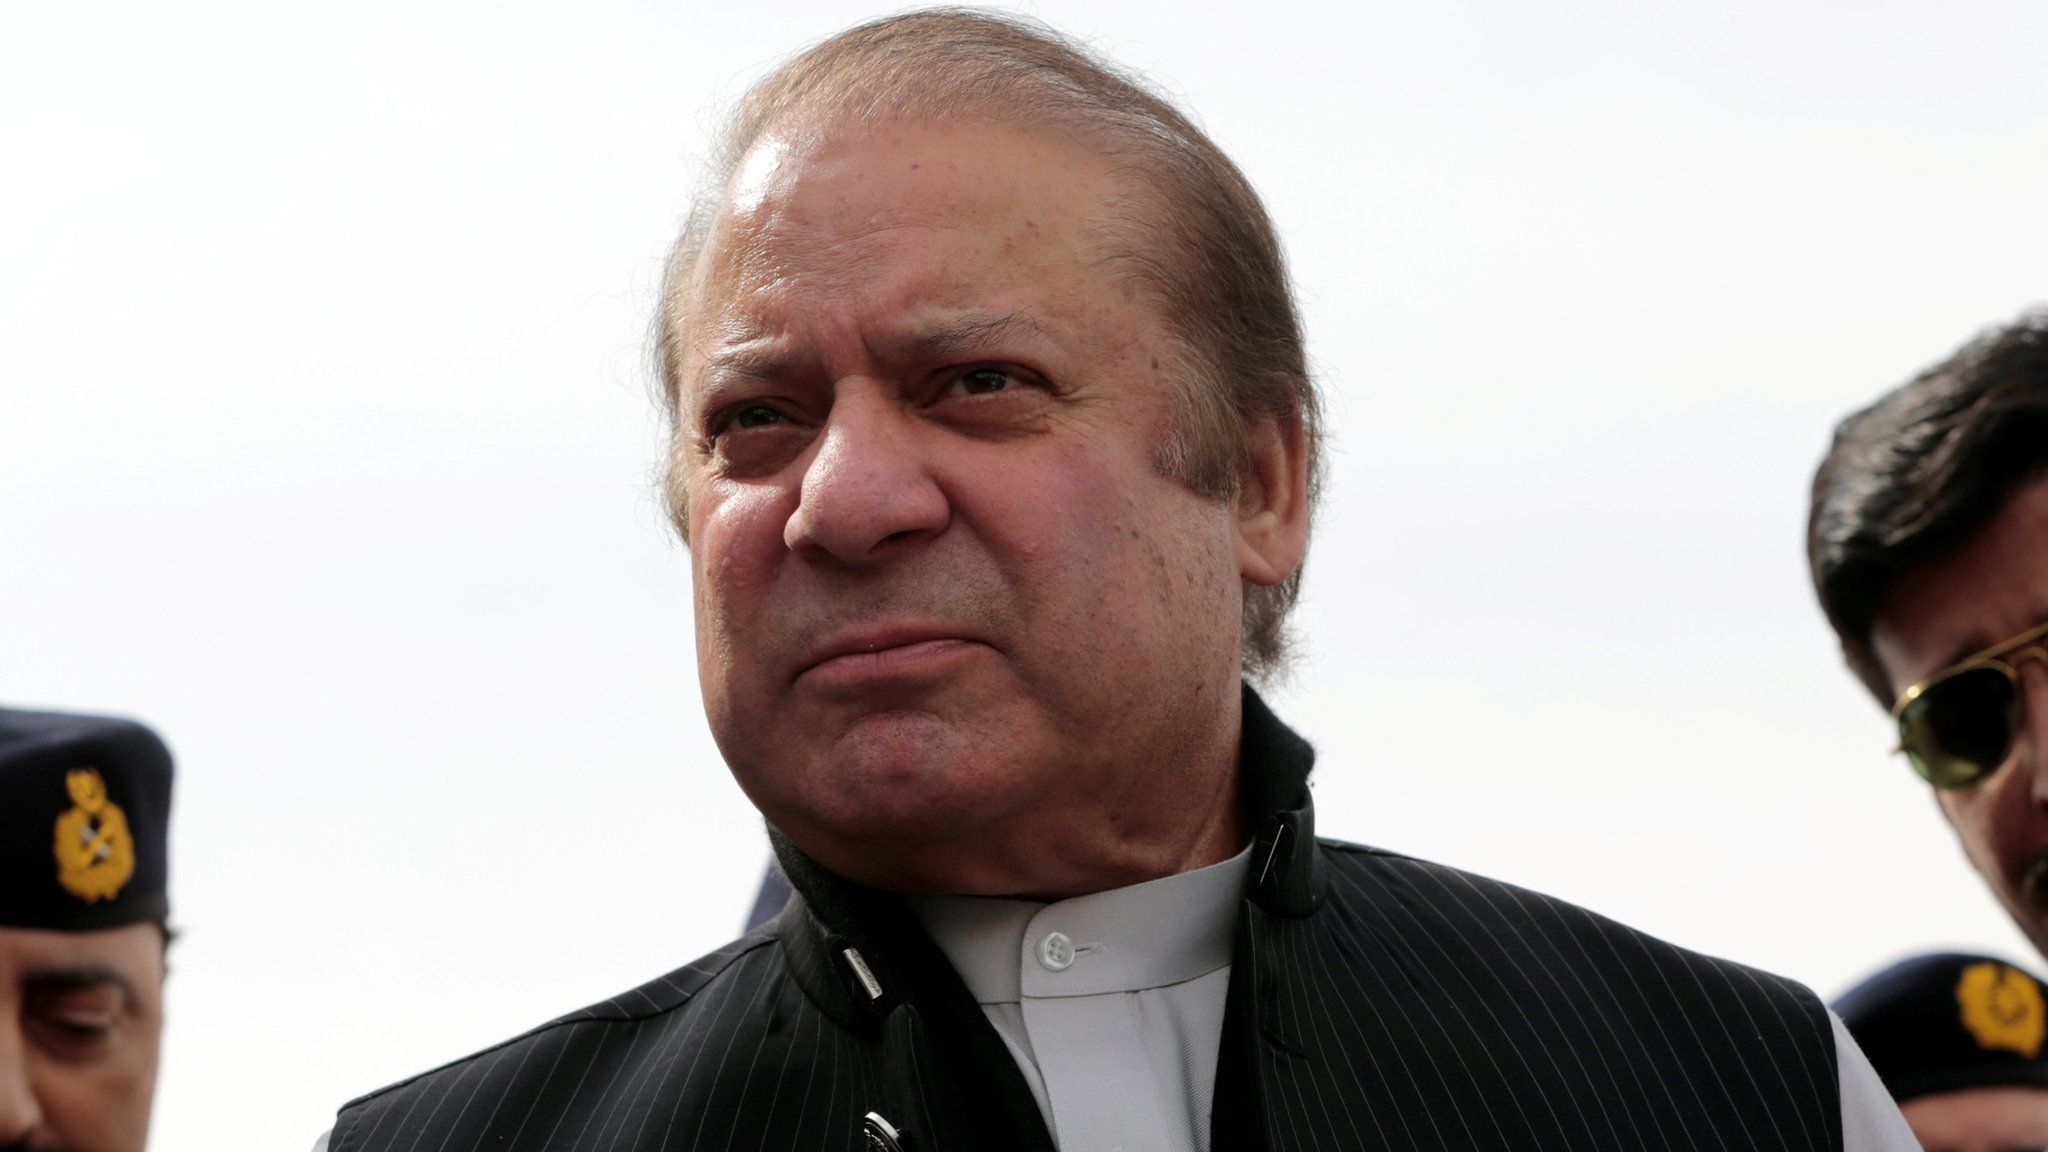 Pakistani Prime Minister Nawaz Sharif attends a ceremony to inaugurate the M9 motorway between Karachi and Hyderabad, near Hyderabad Pakistan on 3 February 2017